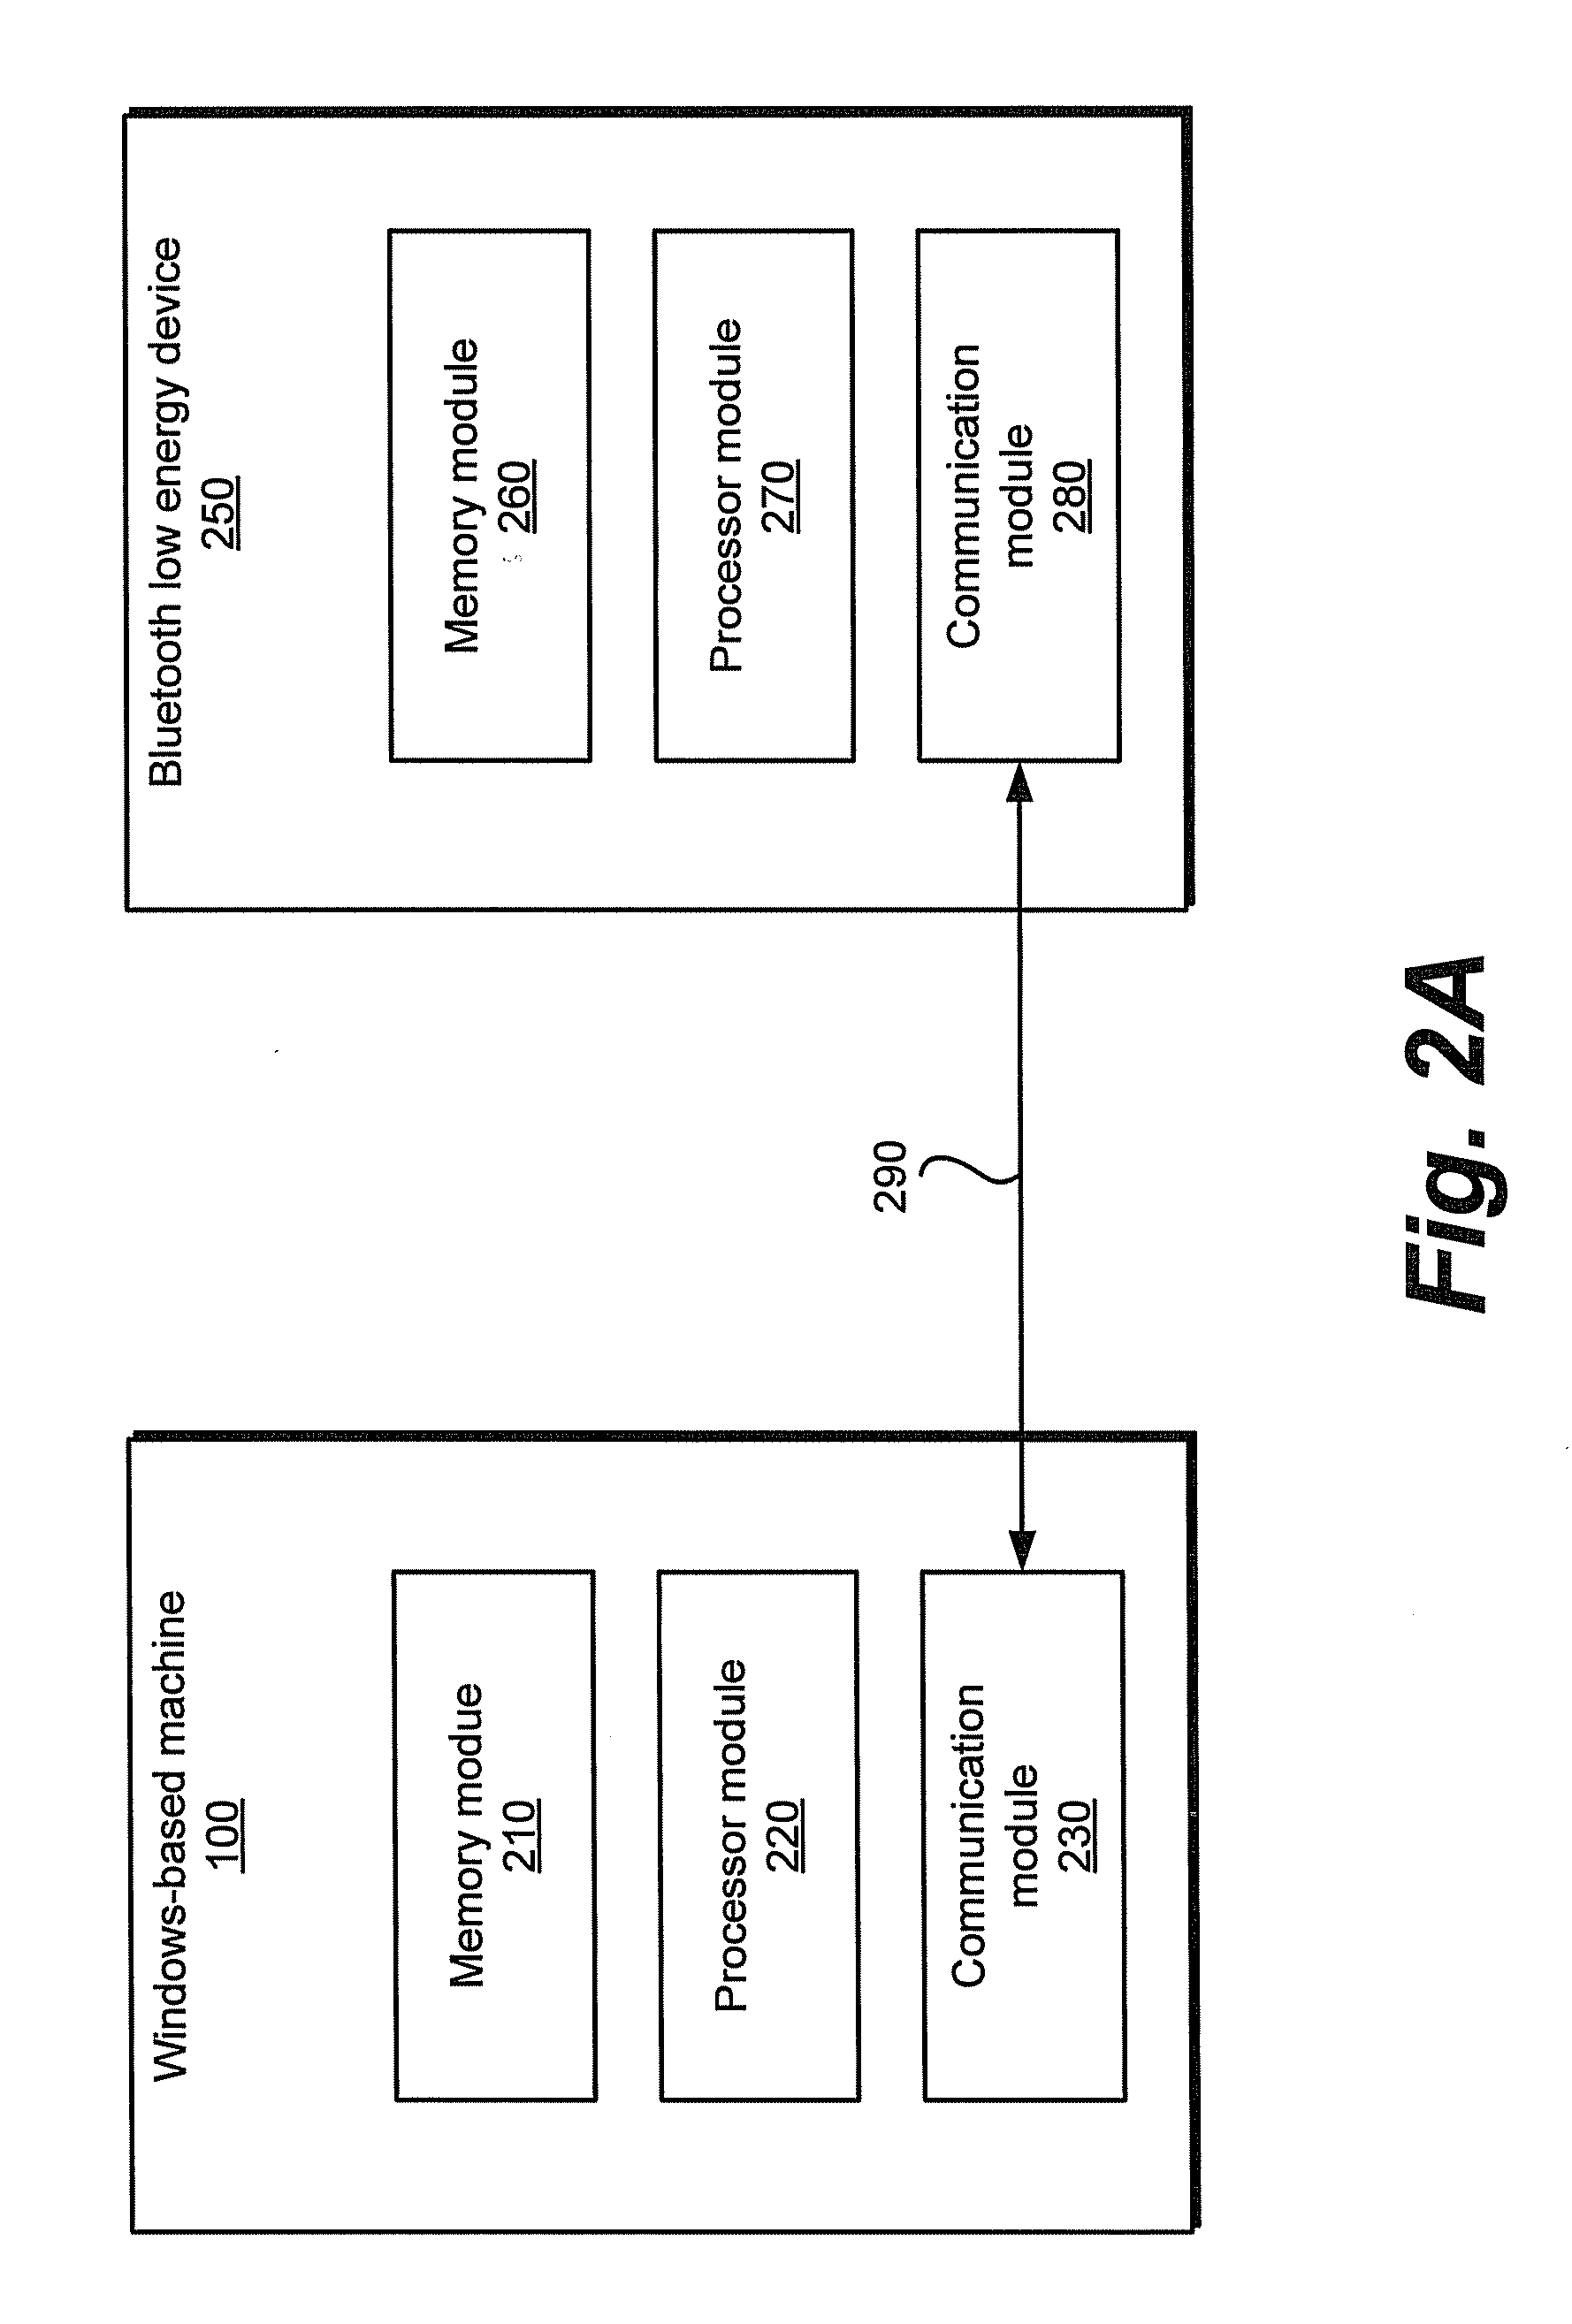 Windows Portable Devices Interface for Bluetooth Low Energy Devices